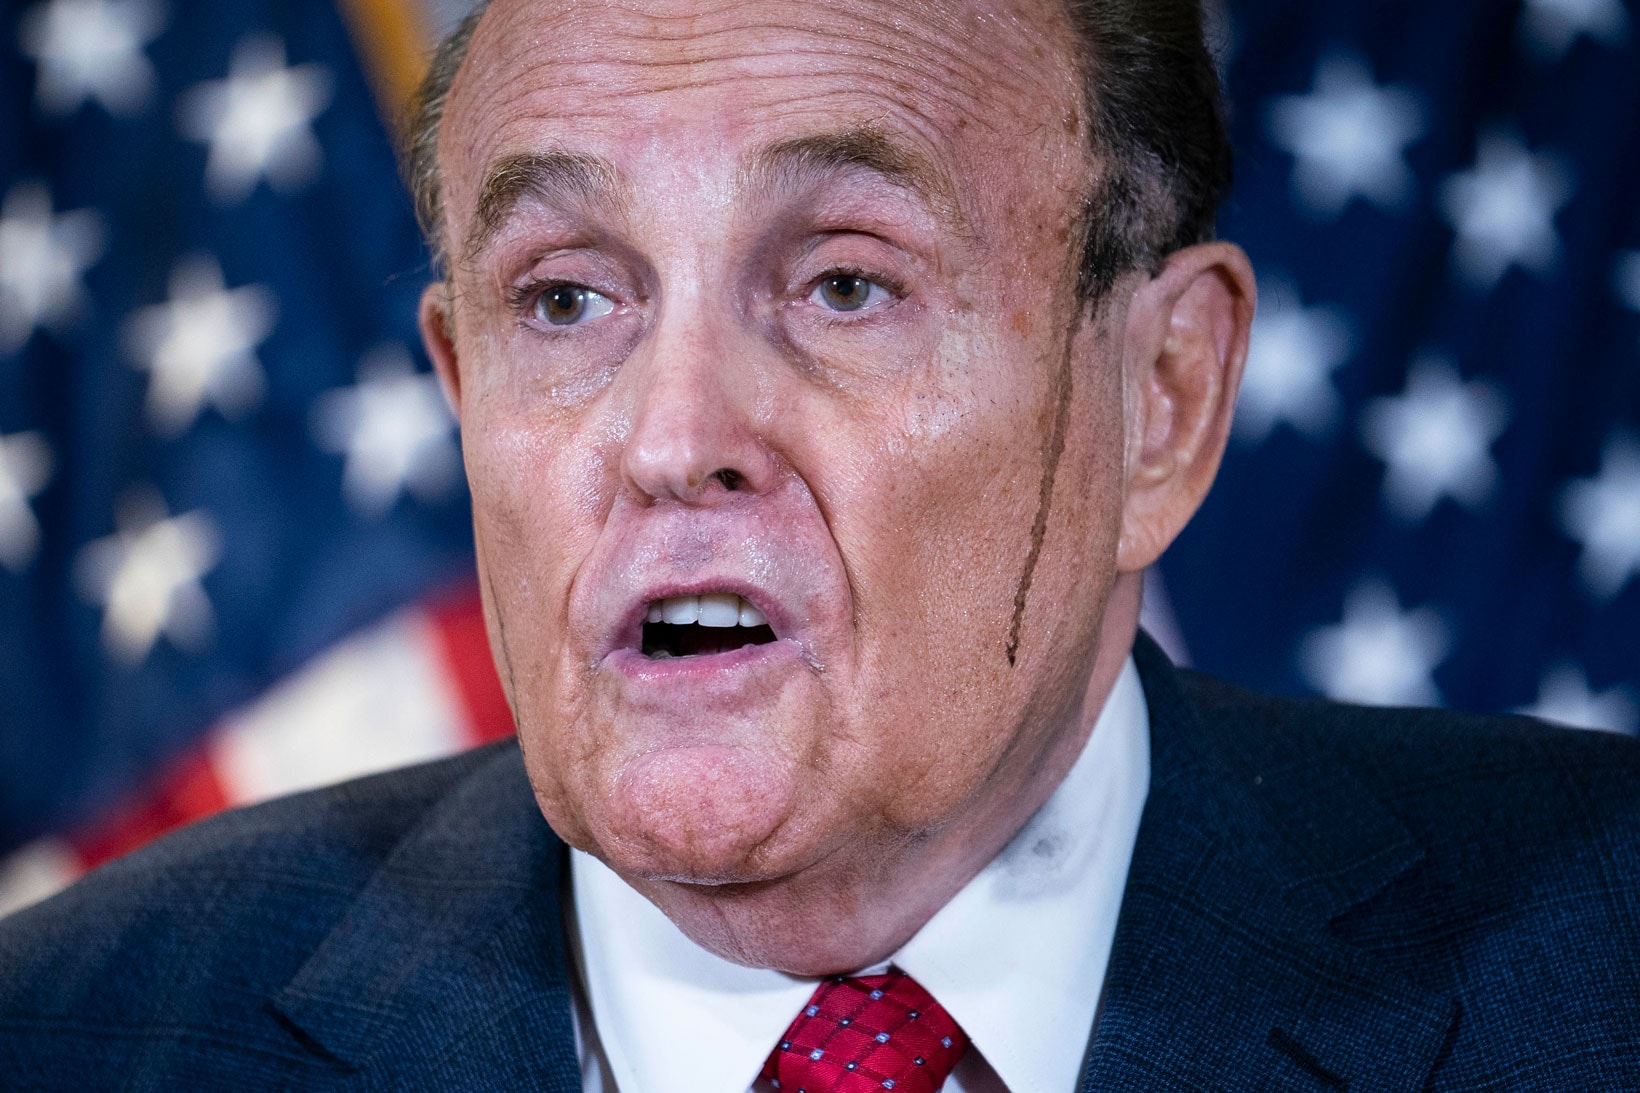 Rudy Giuliani Hair Dye Leaking Melting Dripping Sideburns Press Conference